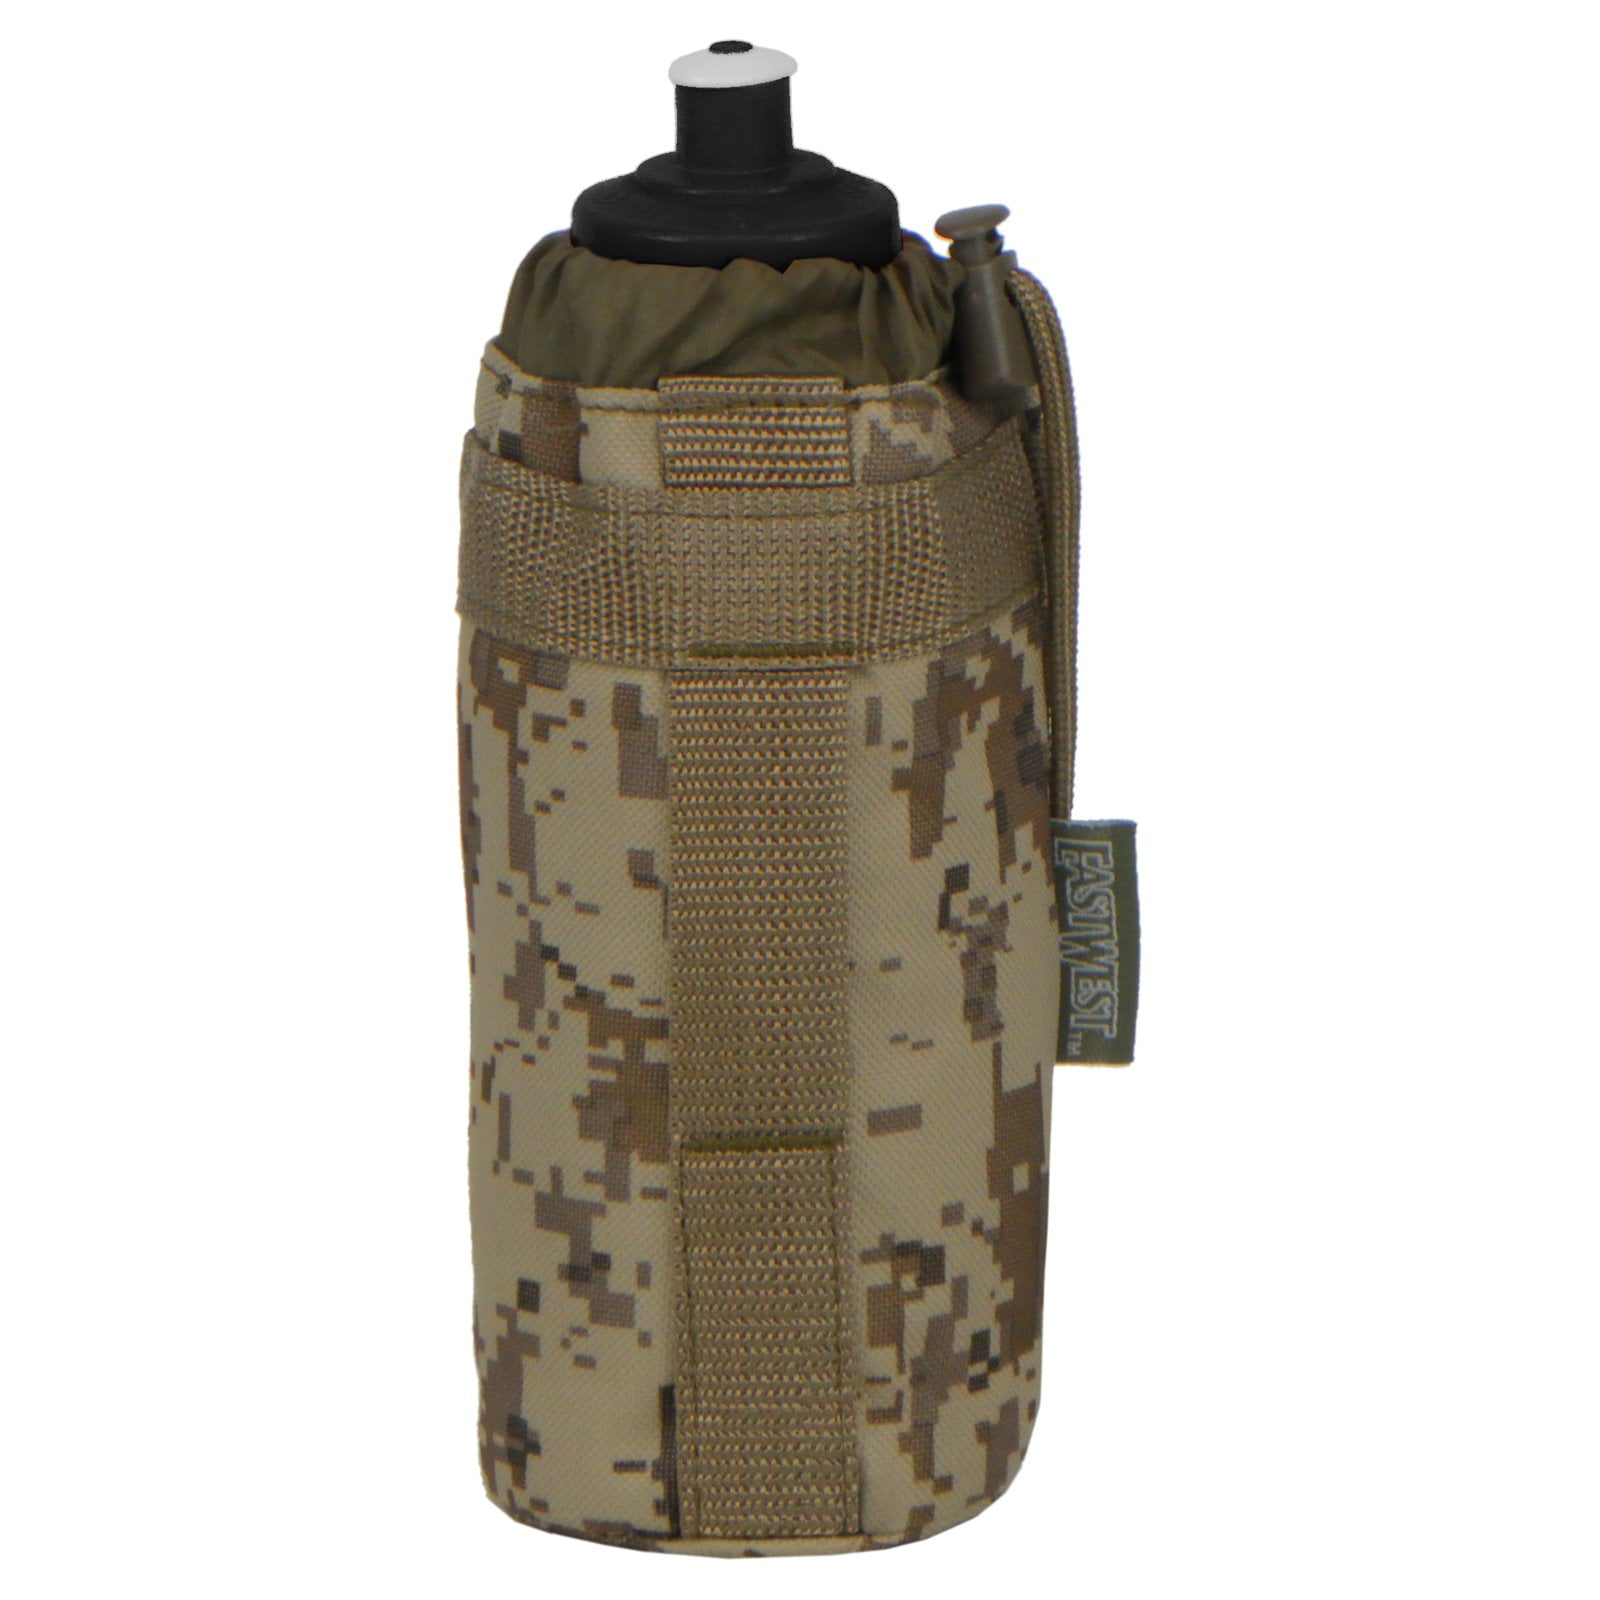 Protector Plus Military Water Bottle Pouch Holder Tactical Kettle Gear Molle Bag 